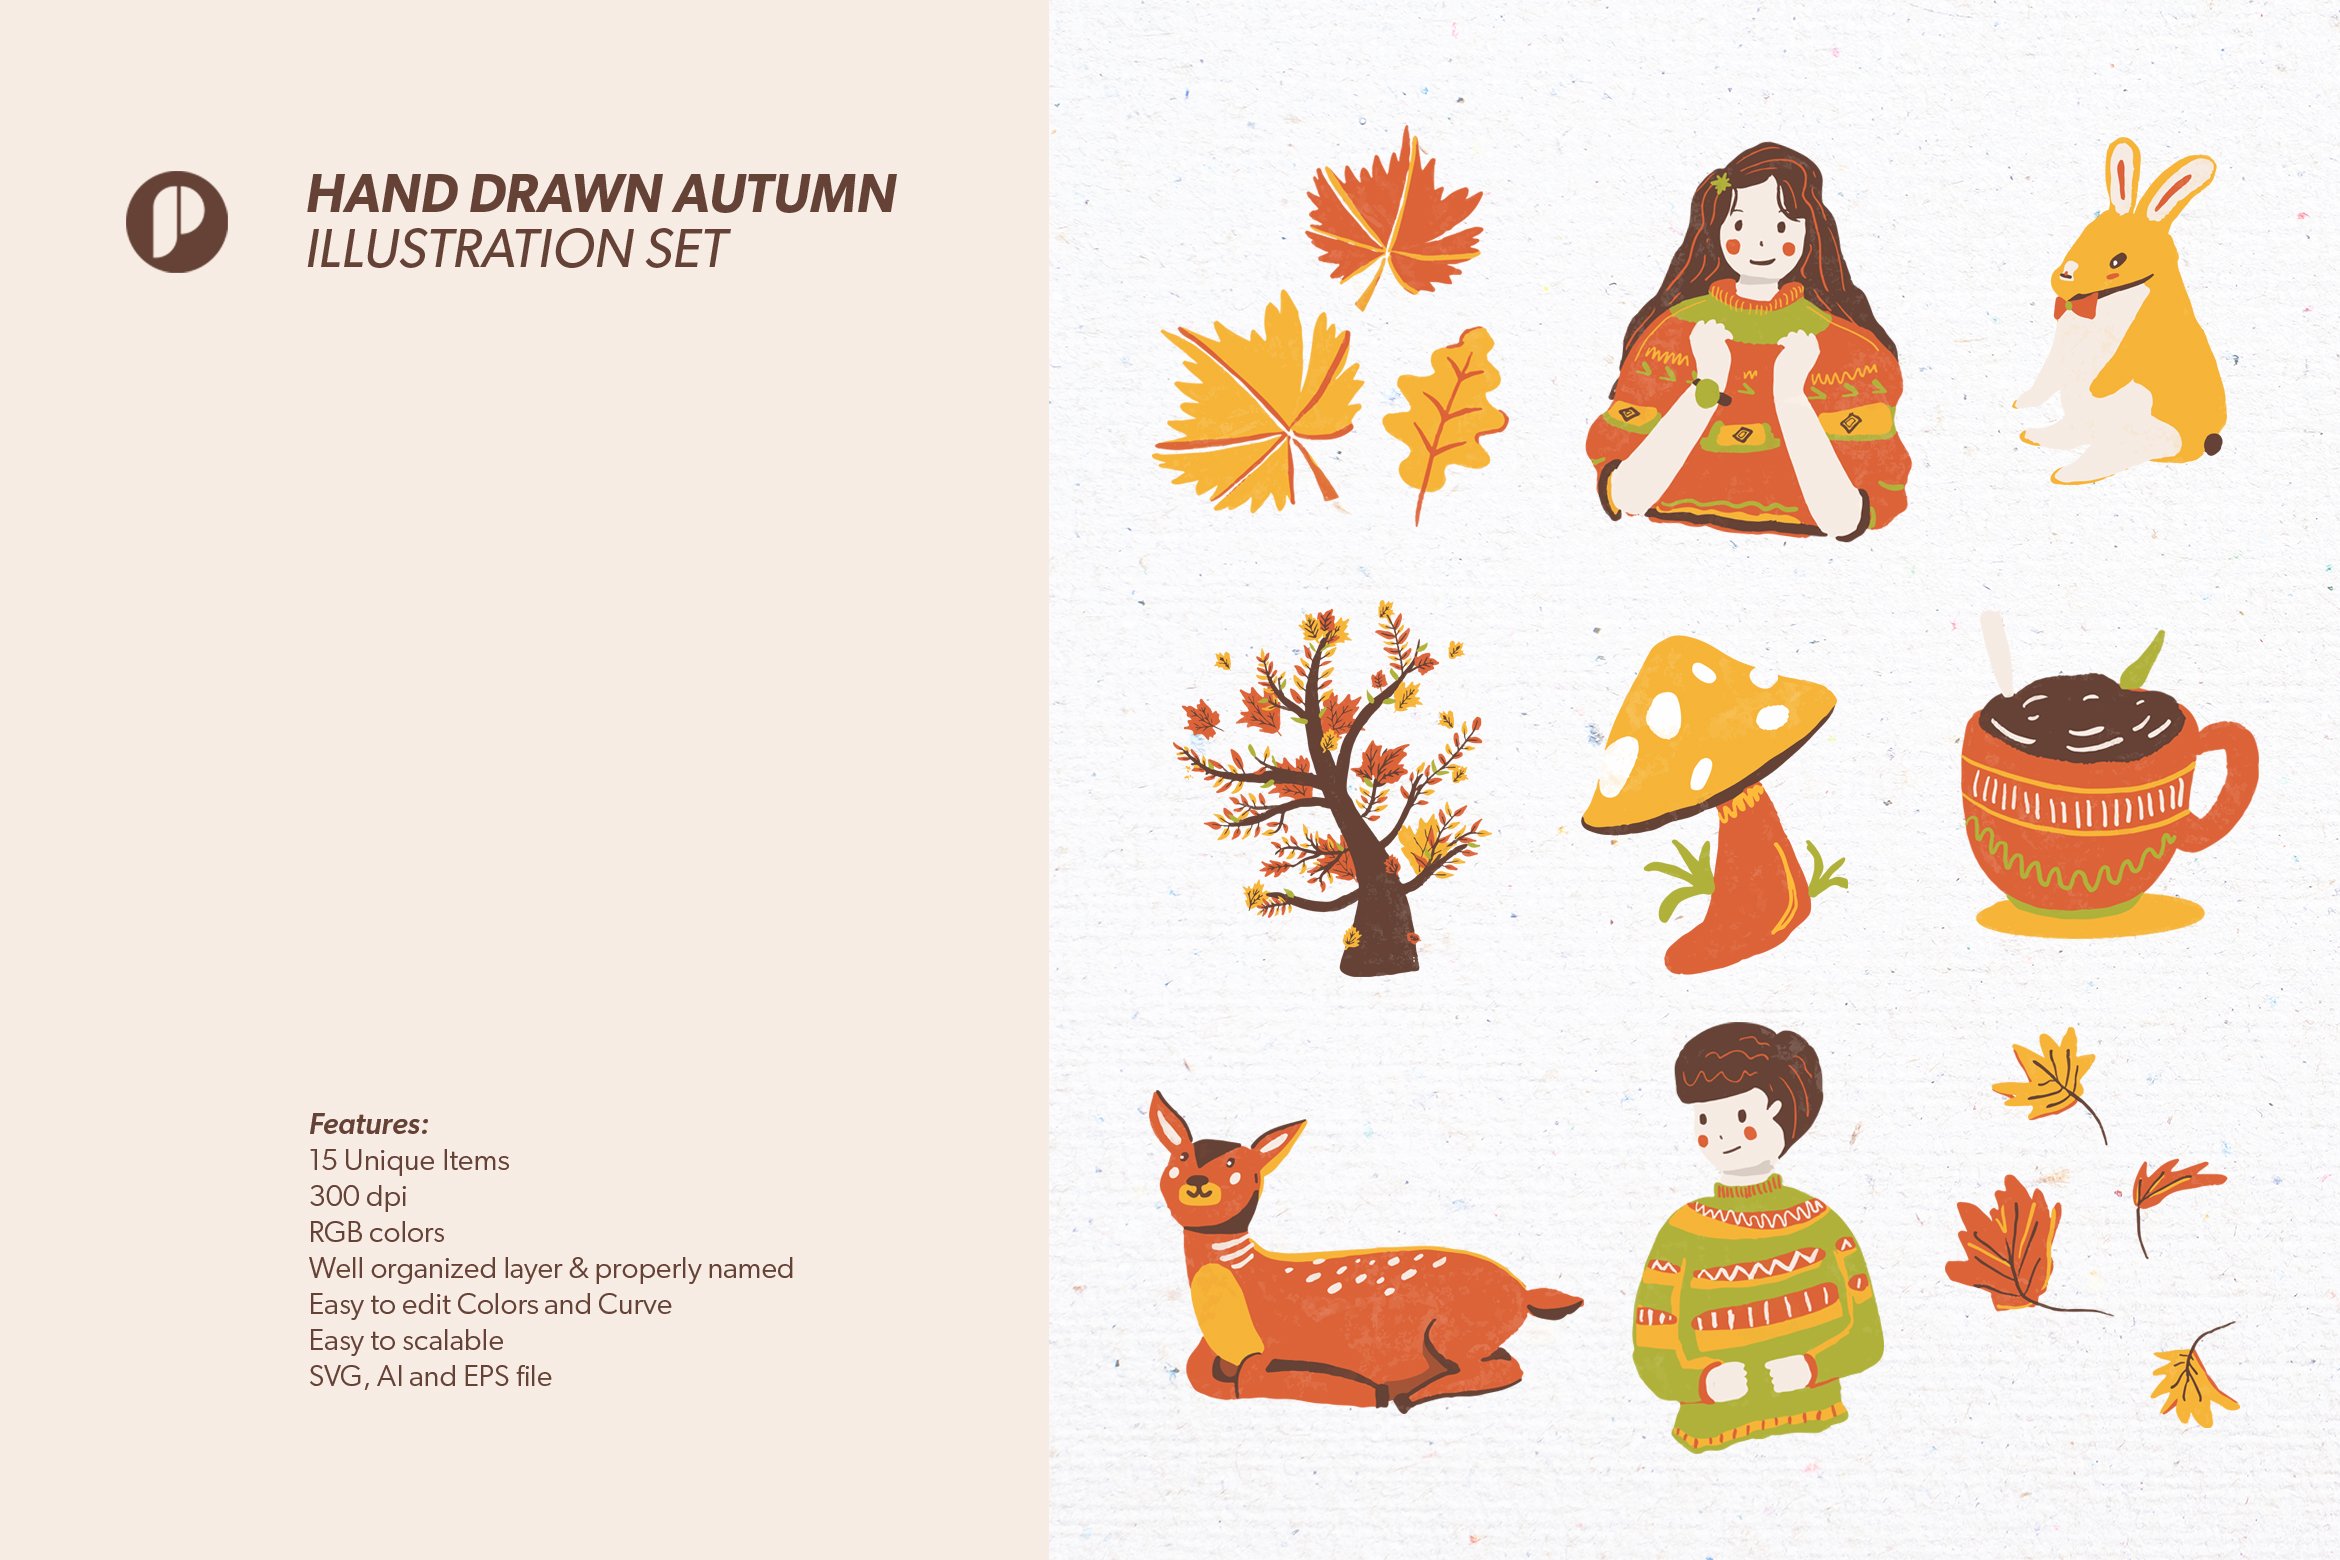 Cool autumn illustrations with the some description.